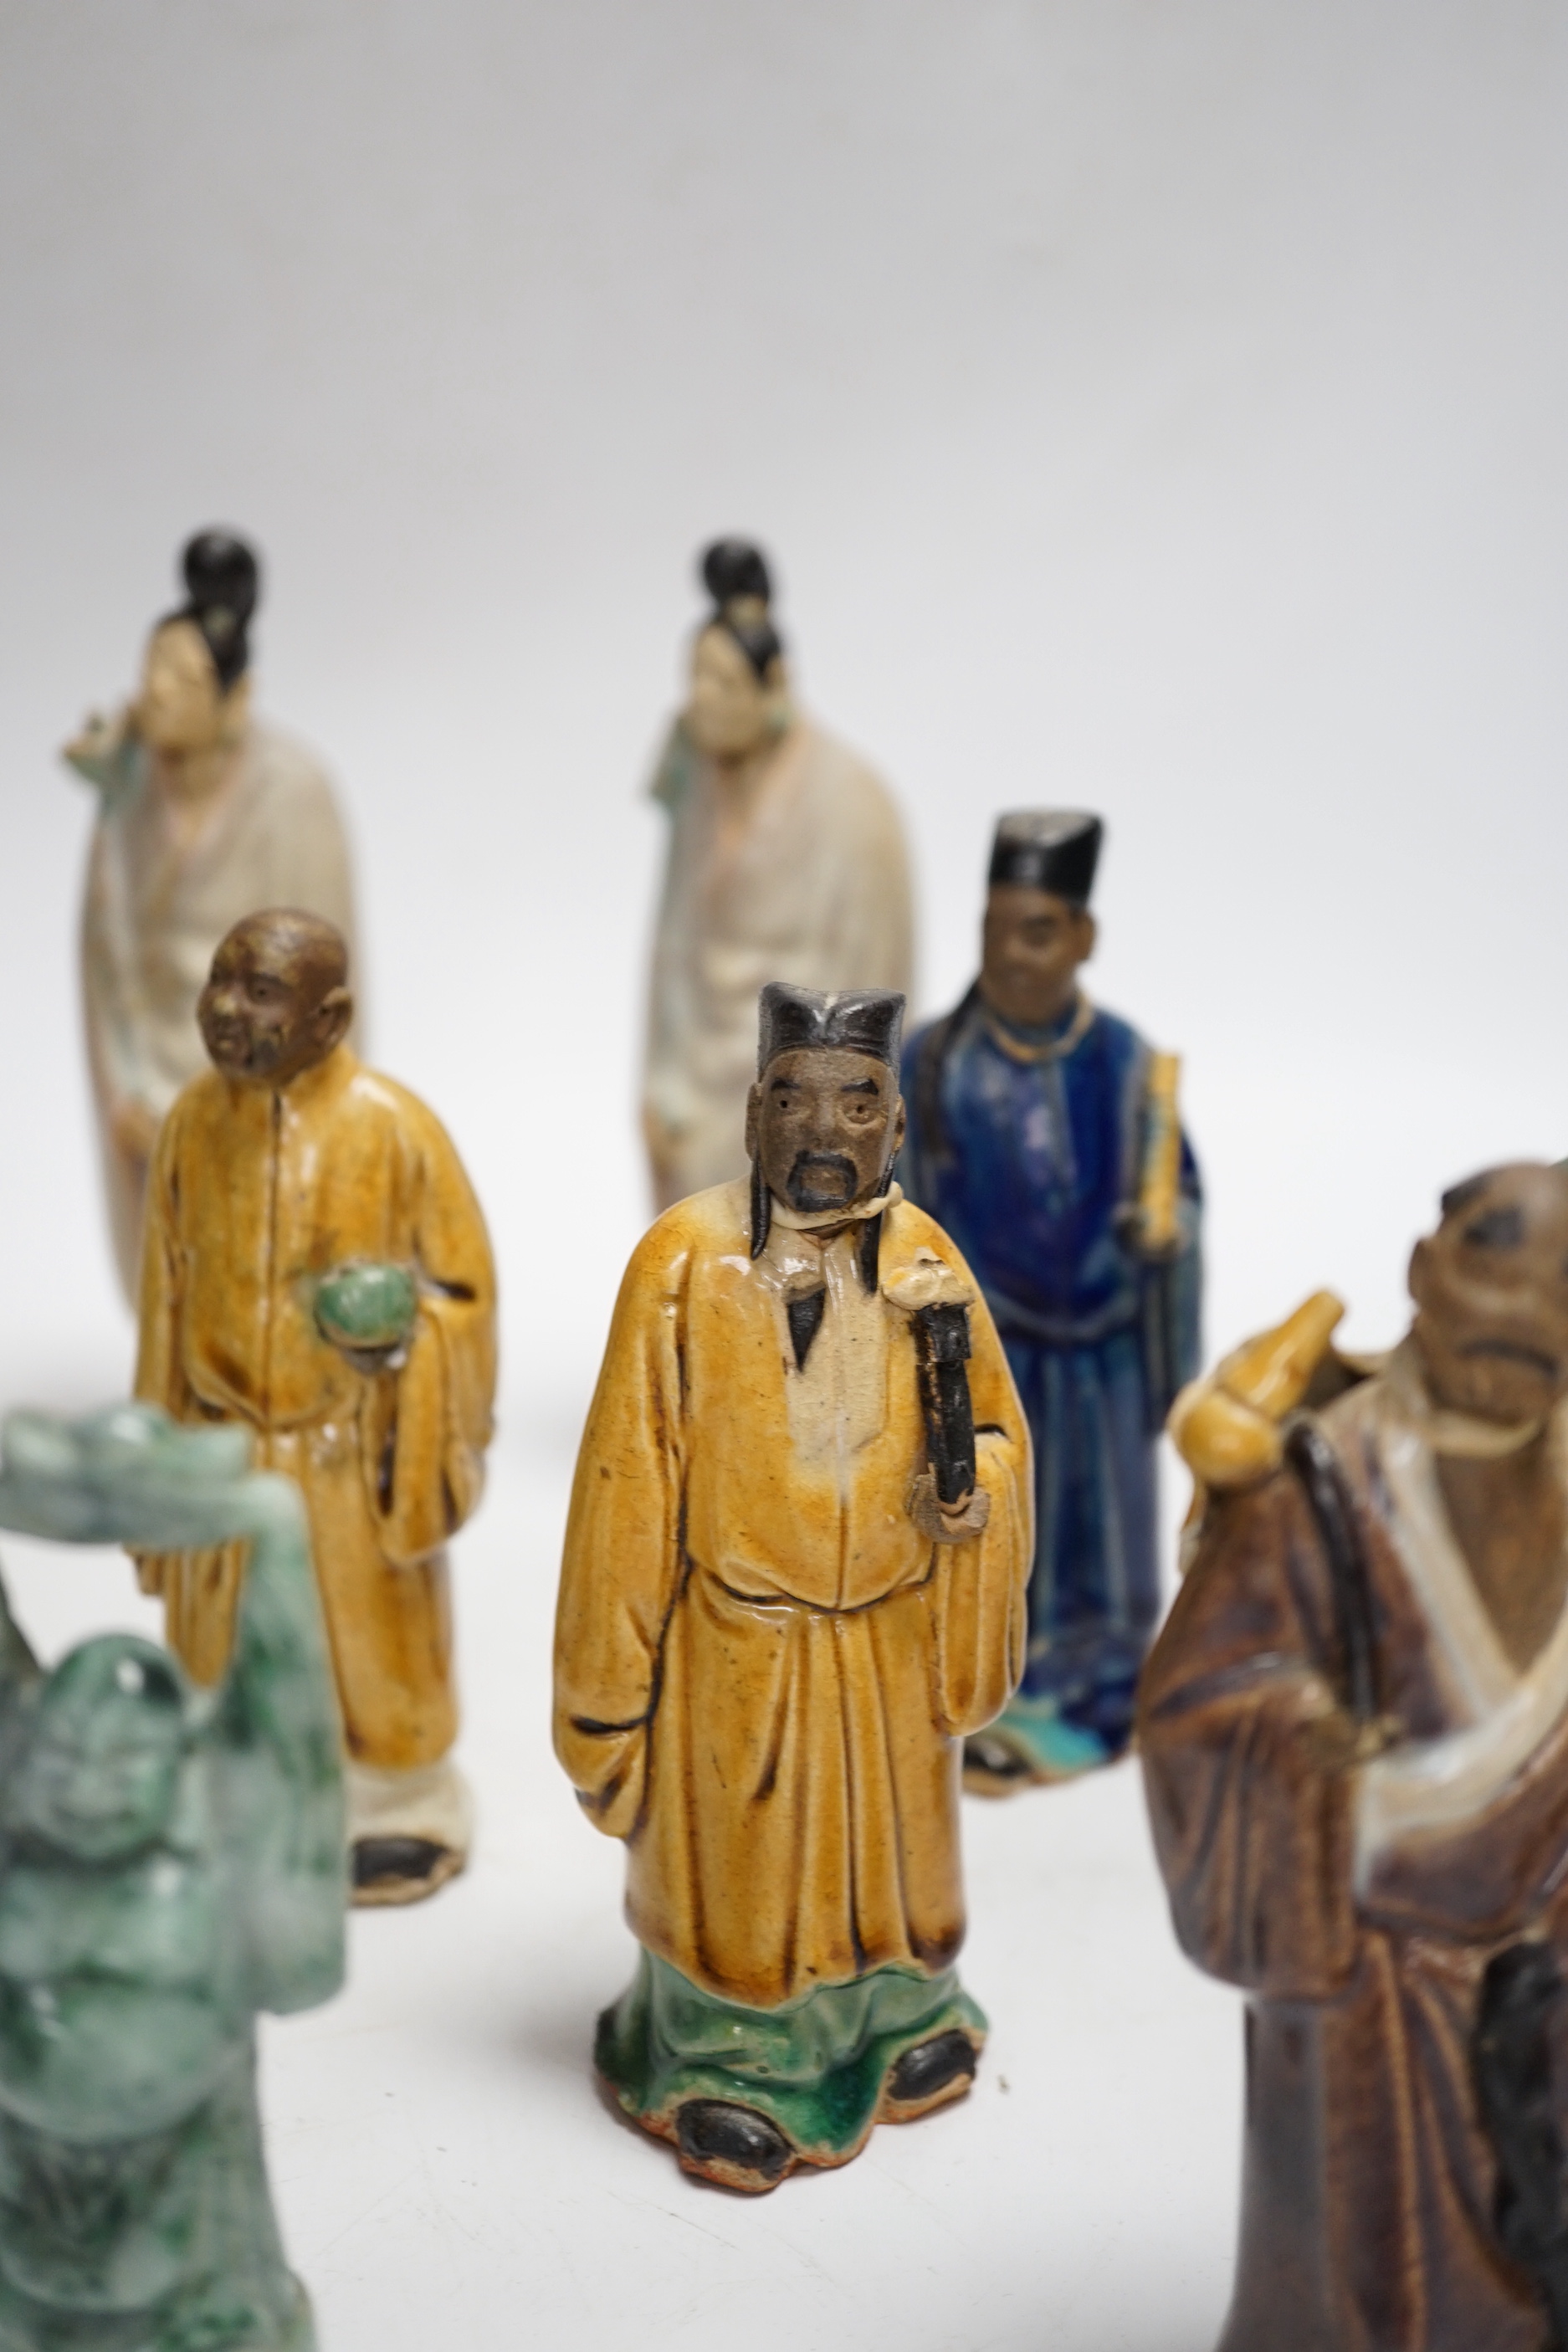 Fifteen Chinese Shiwan-type glazed pottery figures and carved stone figures, early 20th century, tallest 15cm